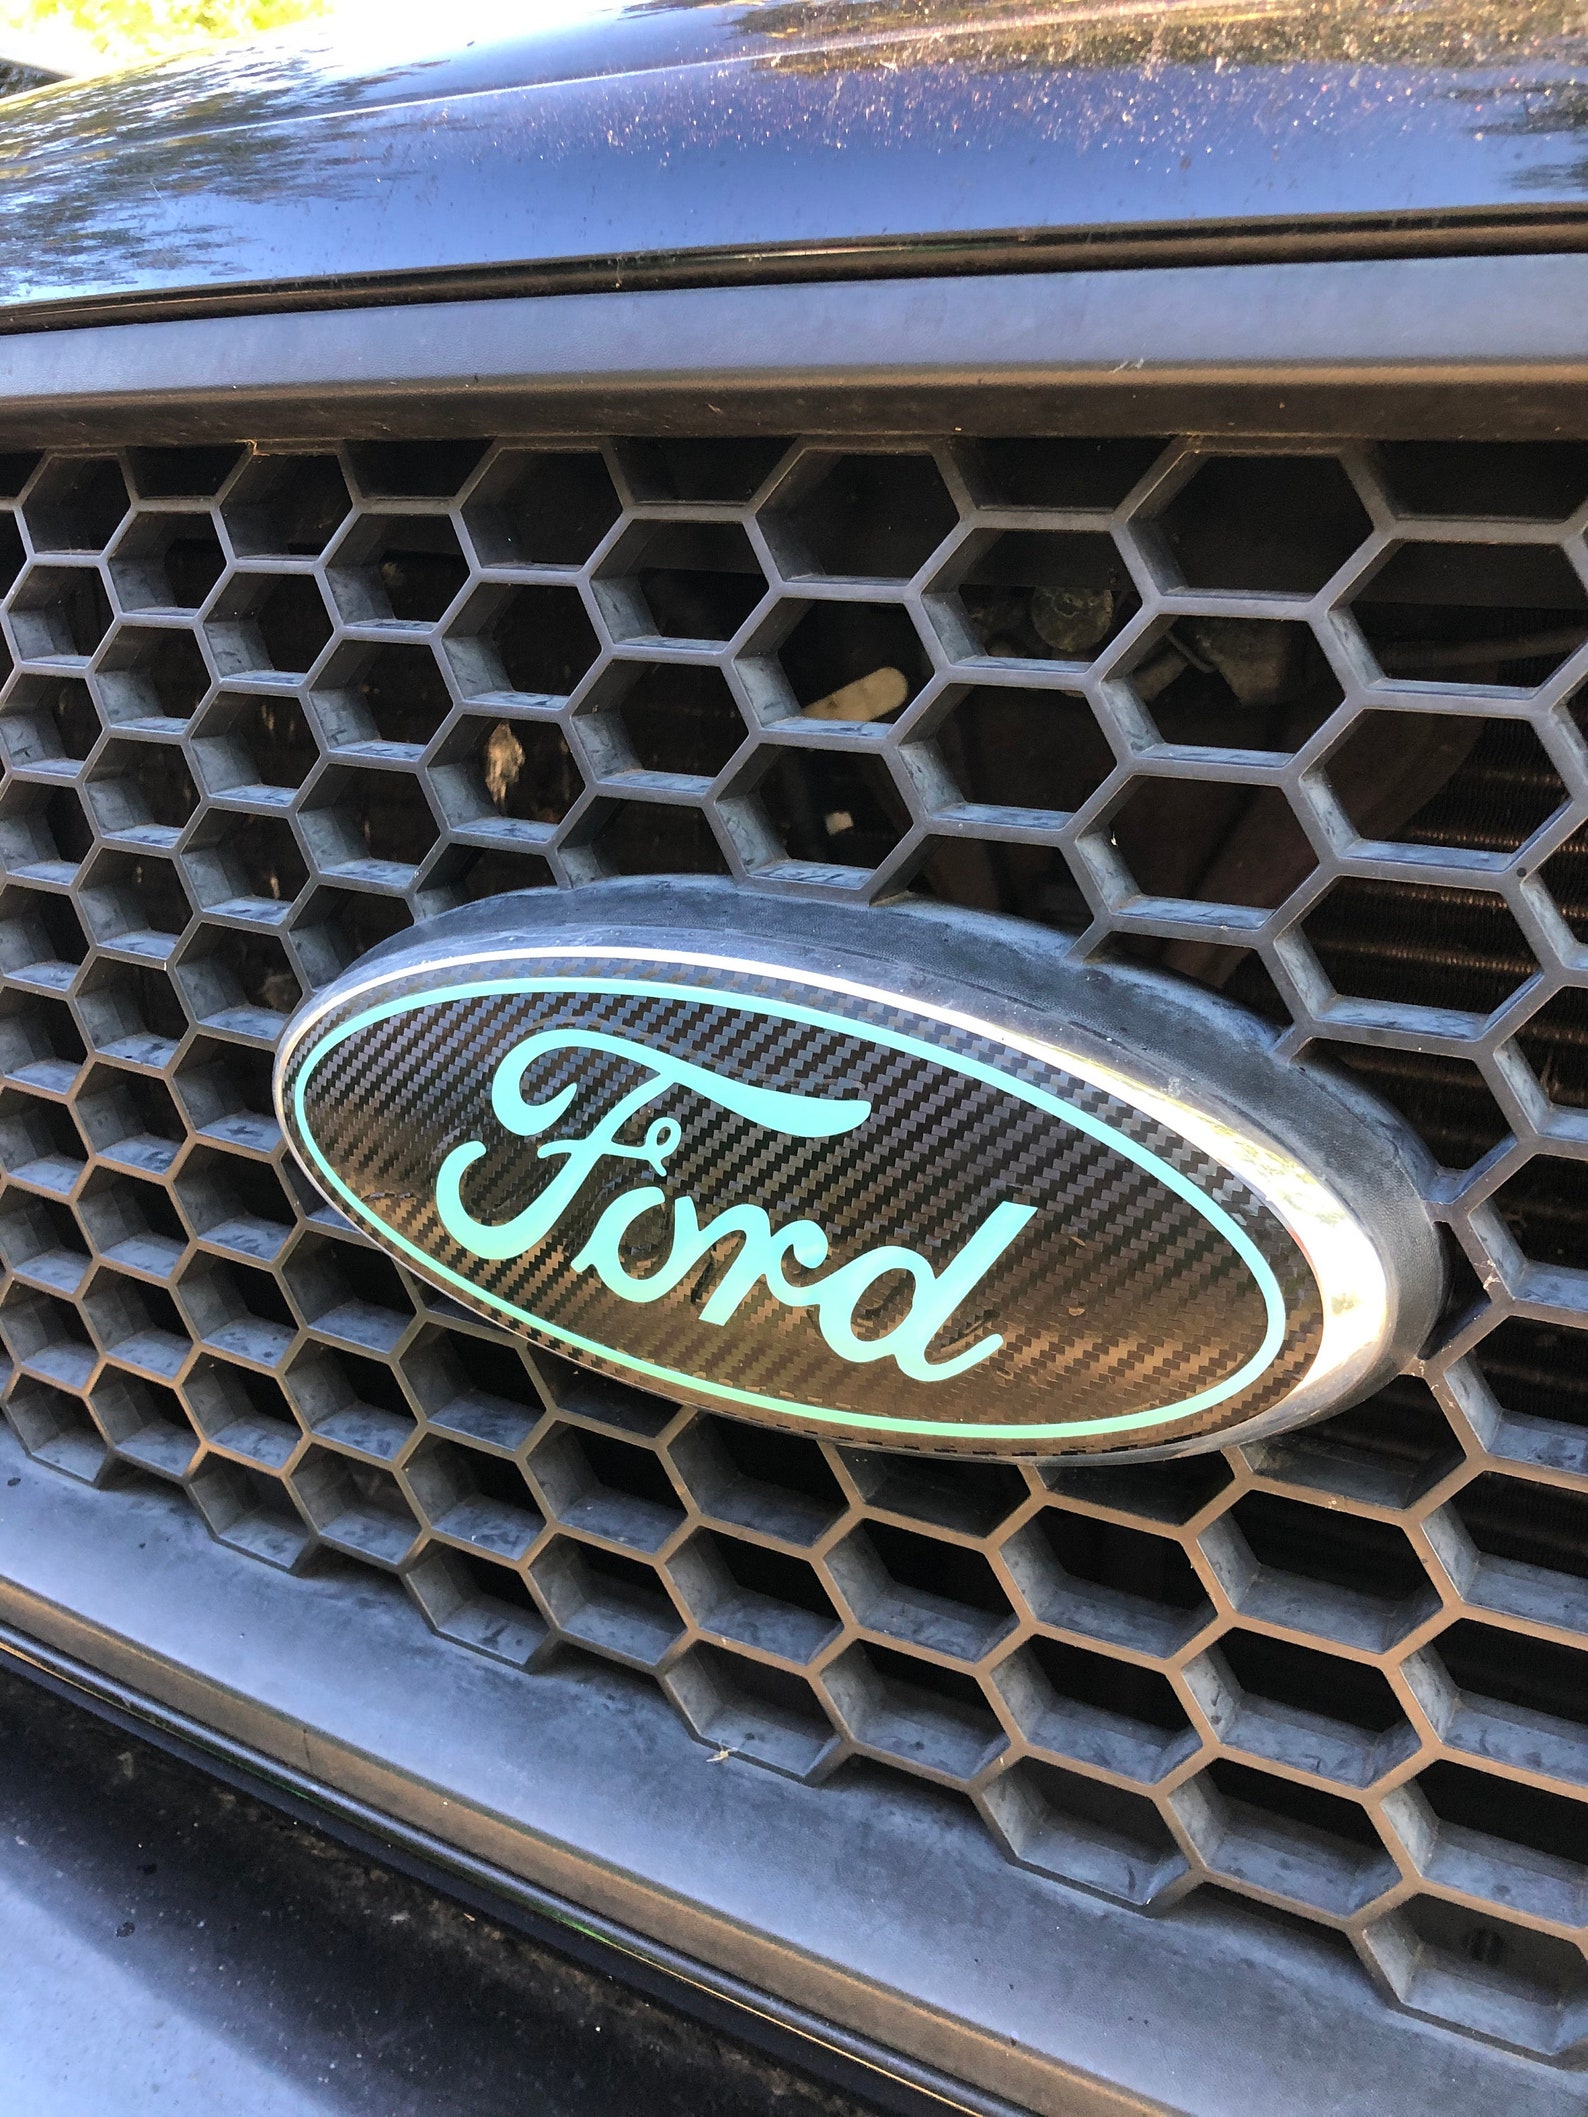 Ford Logo Decals